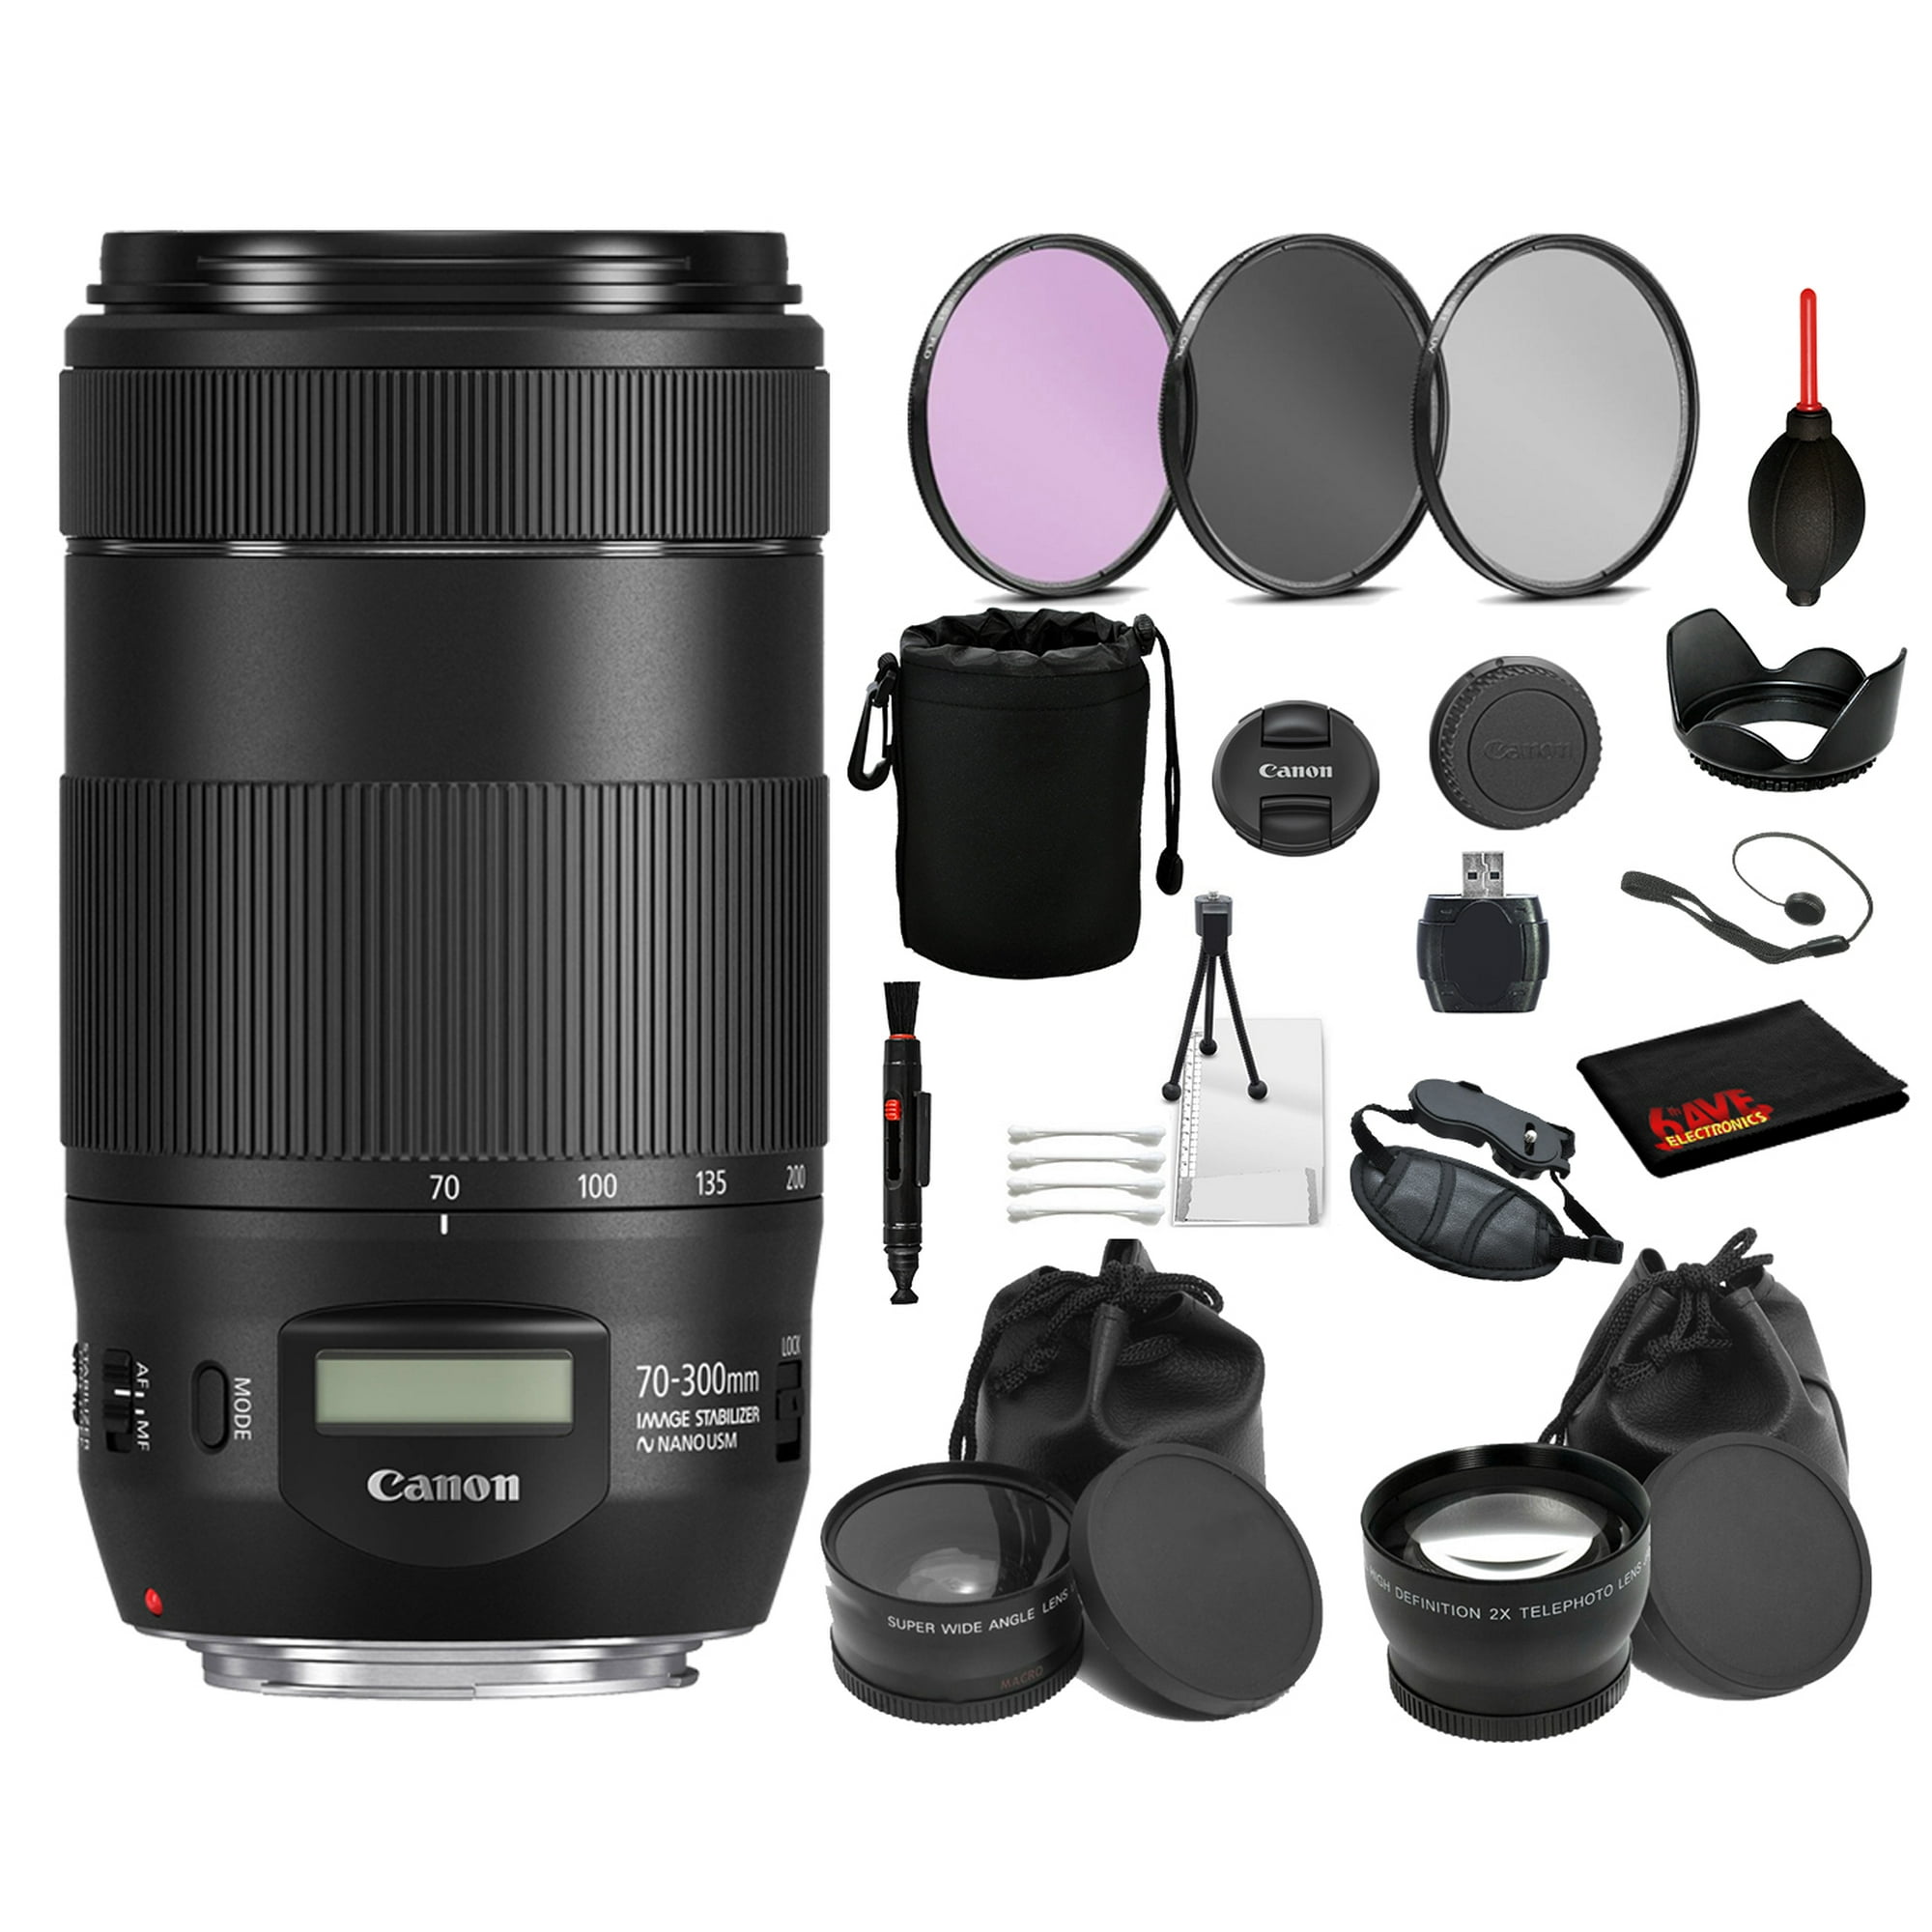 Canon EF 70-300mm f/4-5.6 IS II USM Lens with Bundle Package Deal